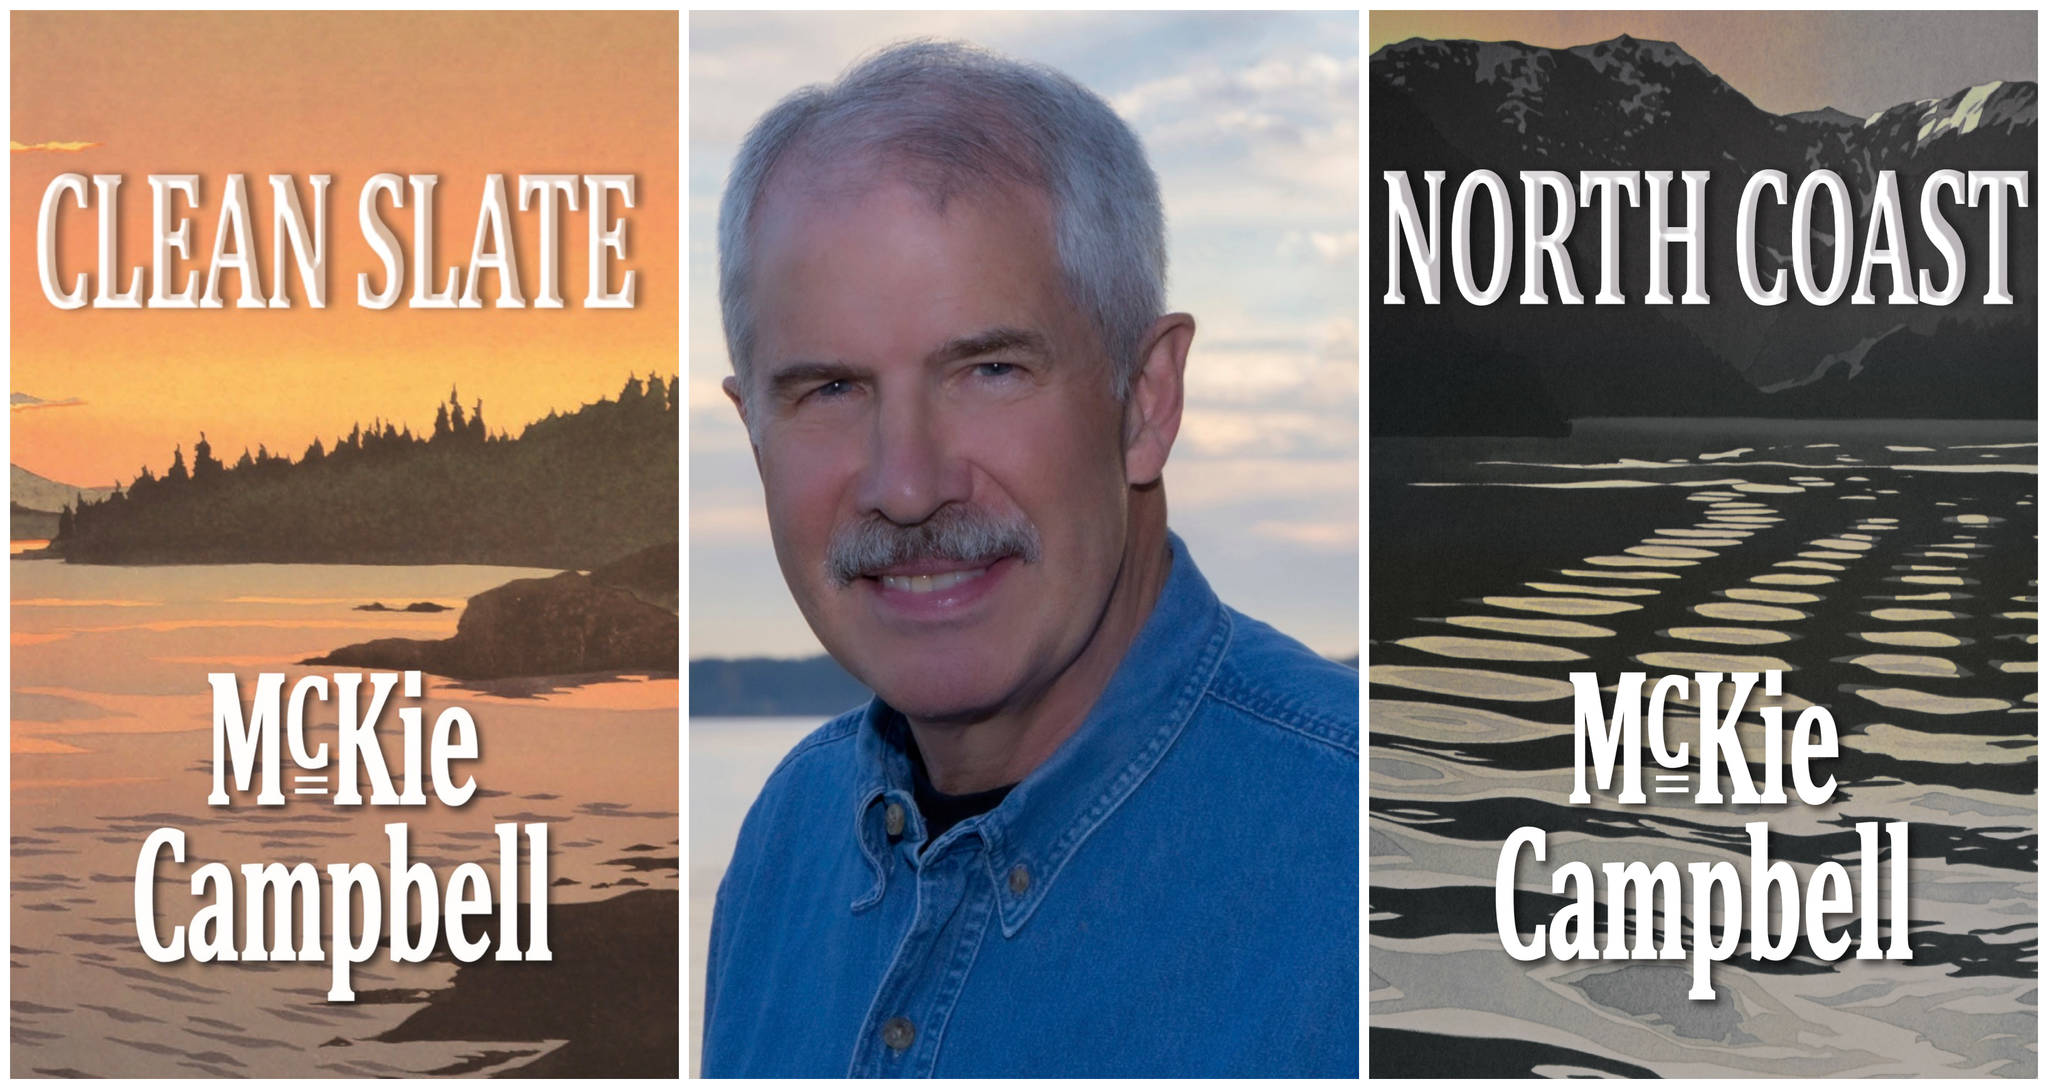 This composite image shows the covers of McKie Campbell’s first two novels as well as the author. (Courtesy Images)